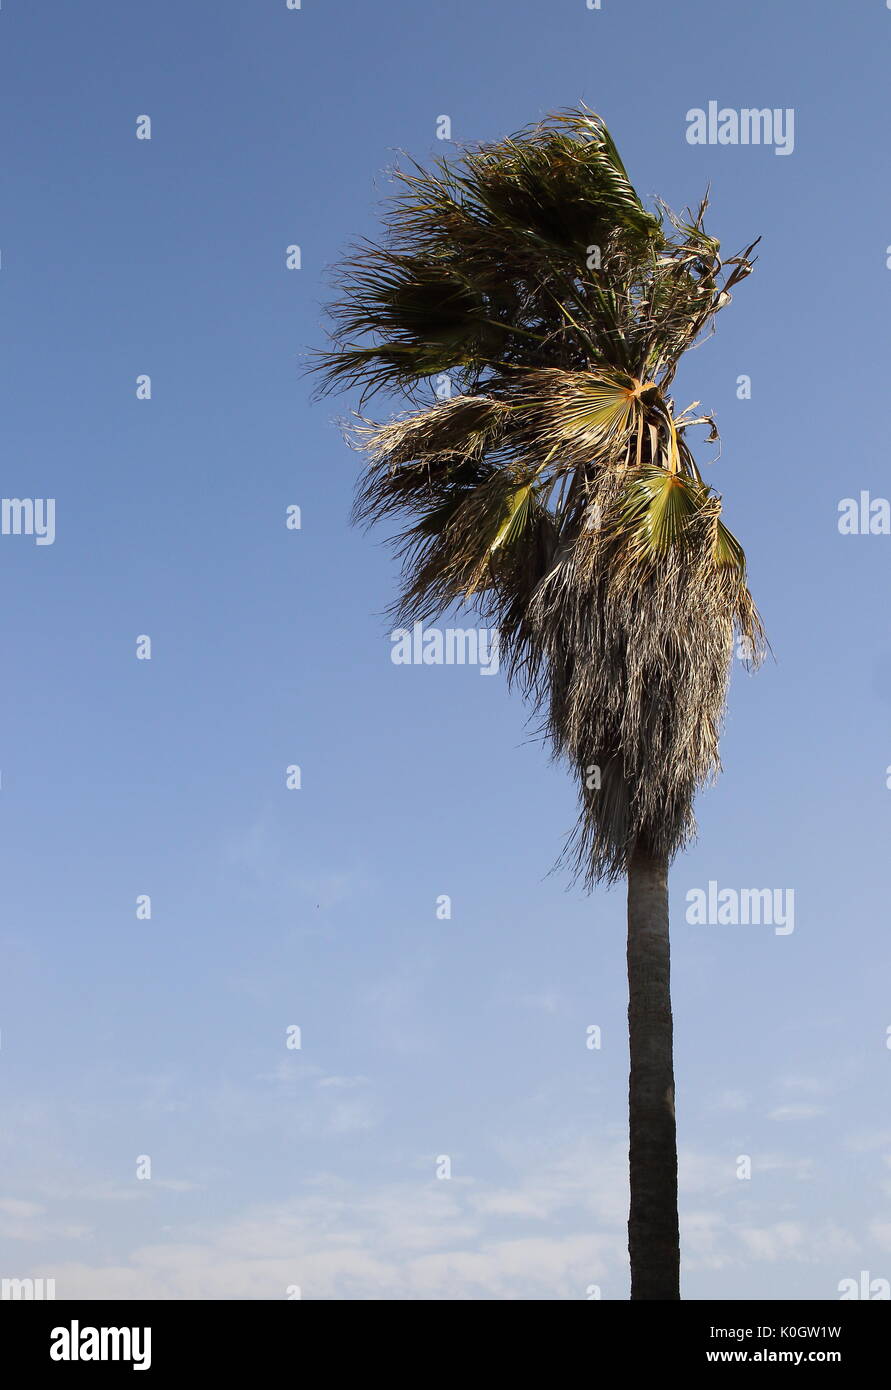 A tall tree with its branches and leaves being blown about by a strong wind in portrait format with copy space and a clear blue sky background Stock Photo